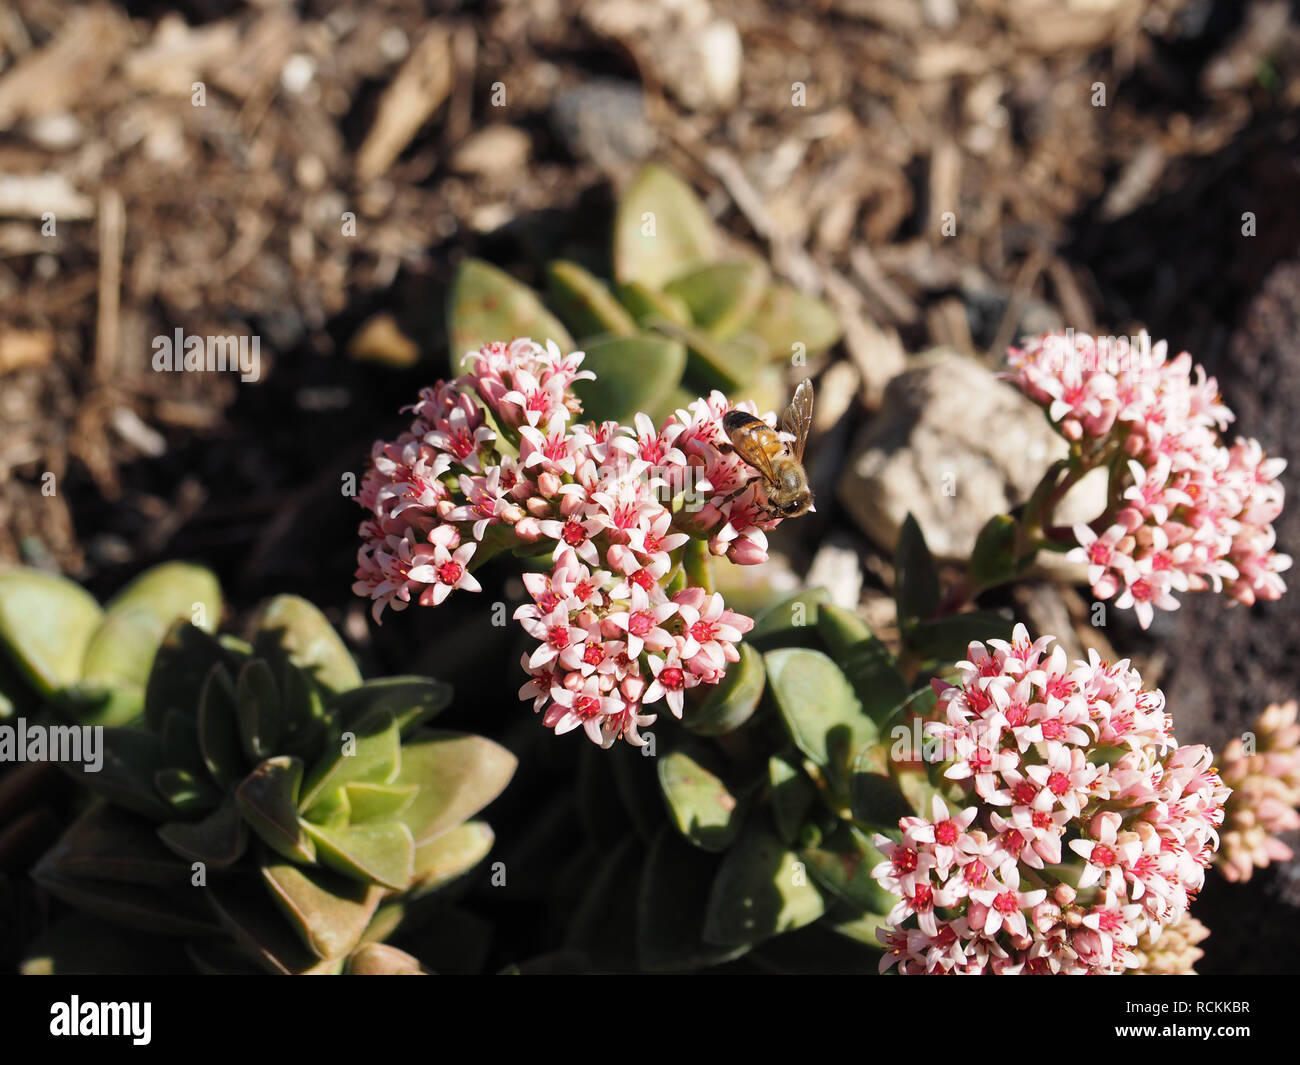 Hard working bee on cluster of flowers from a  succulent plant Stock Photo